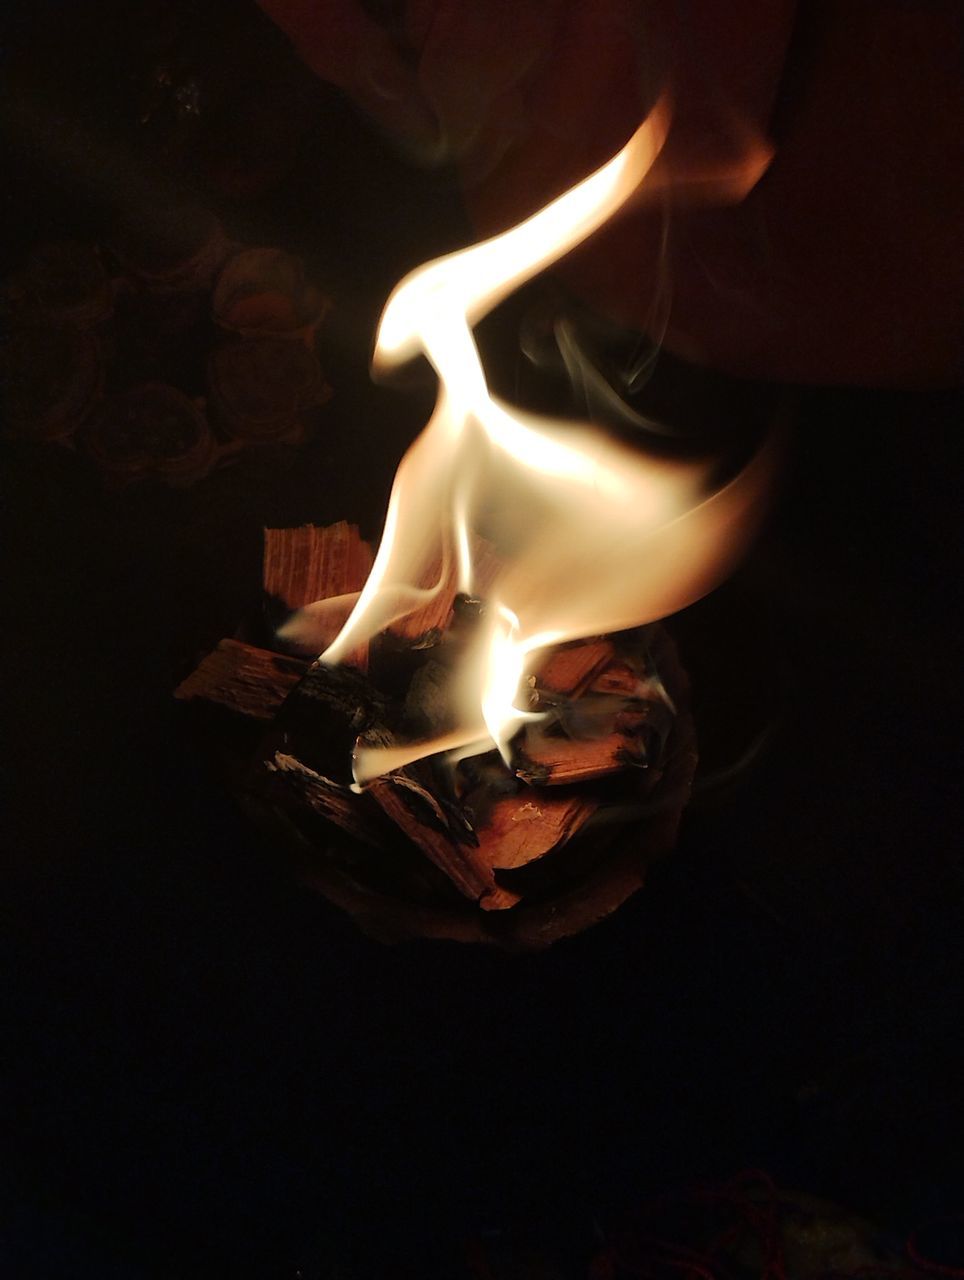 darkness, burning, flame, fire, heat, light, night, indoors, nature, close-up, glowing, motion, black background, lighting